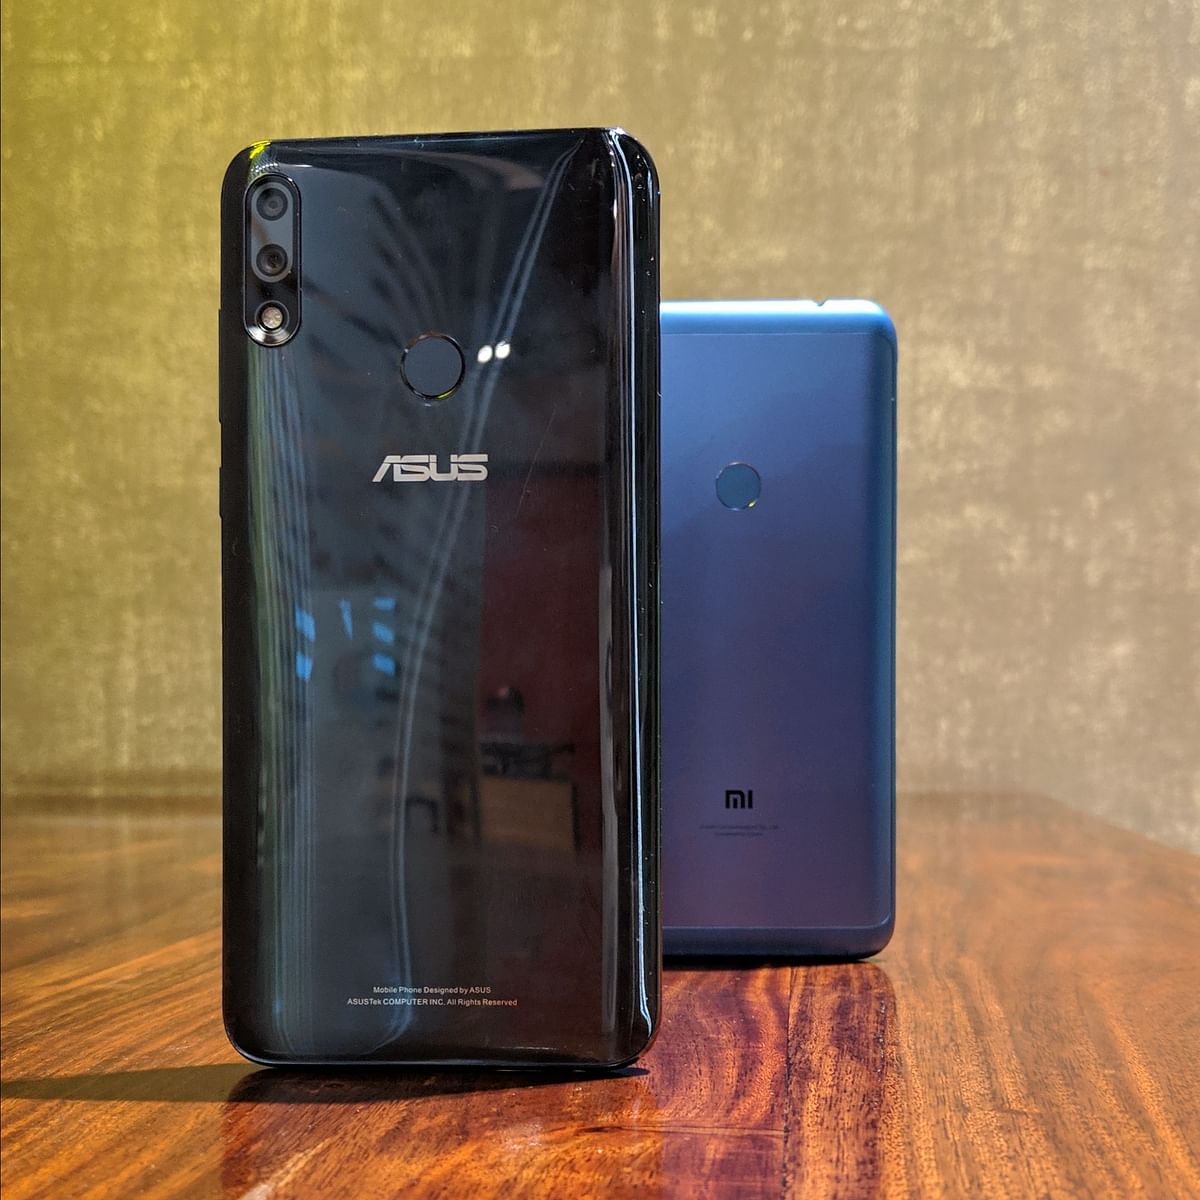 We compared the specifications and features of the Asus Zenfone Max Pro M2 and the Xiaomi Redmi Note 6 Pro. 